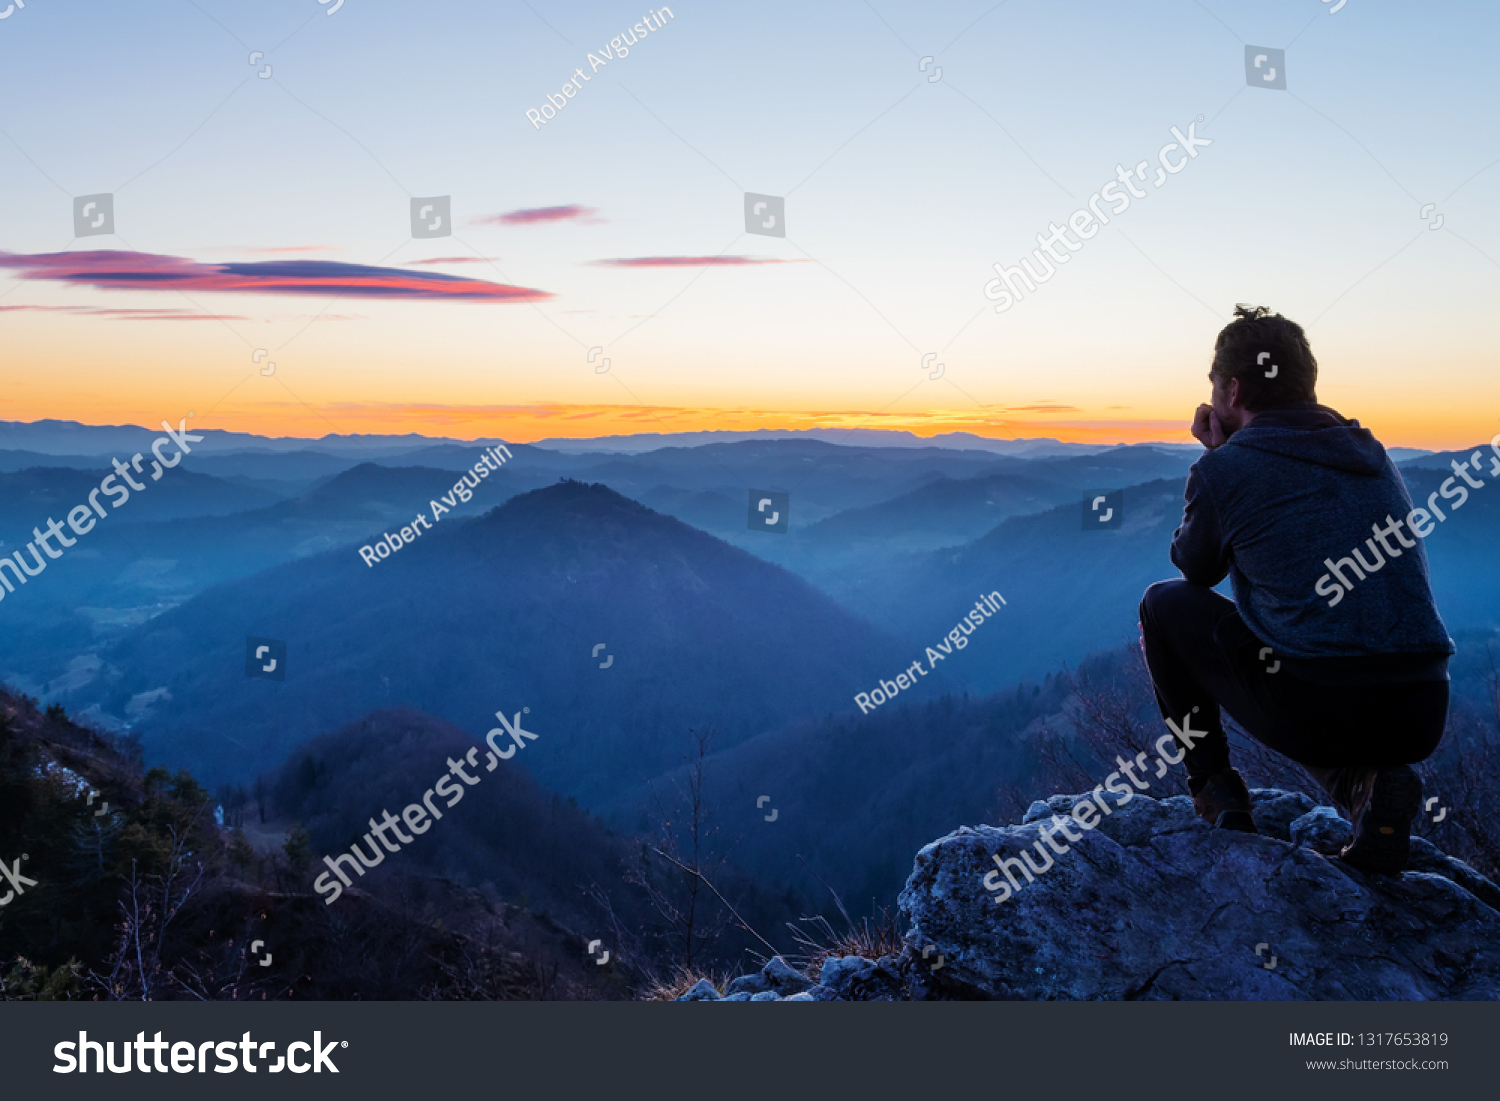 Male hiker crouching on top of the hill and enjoying scenic view of twilight landscape below. Hiking, achievement, expectation, optimism and self-reflection concepts. #1317653819